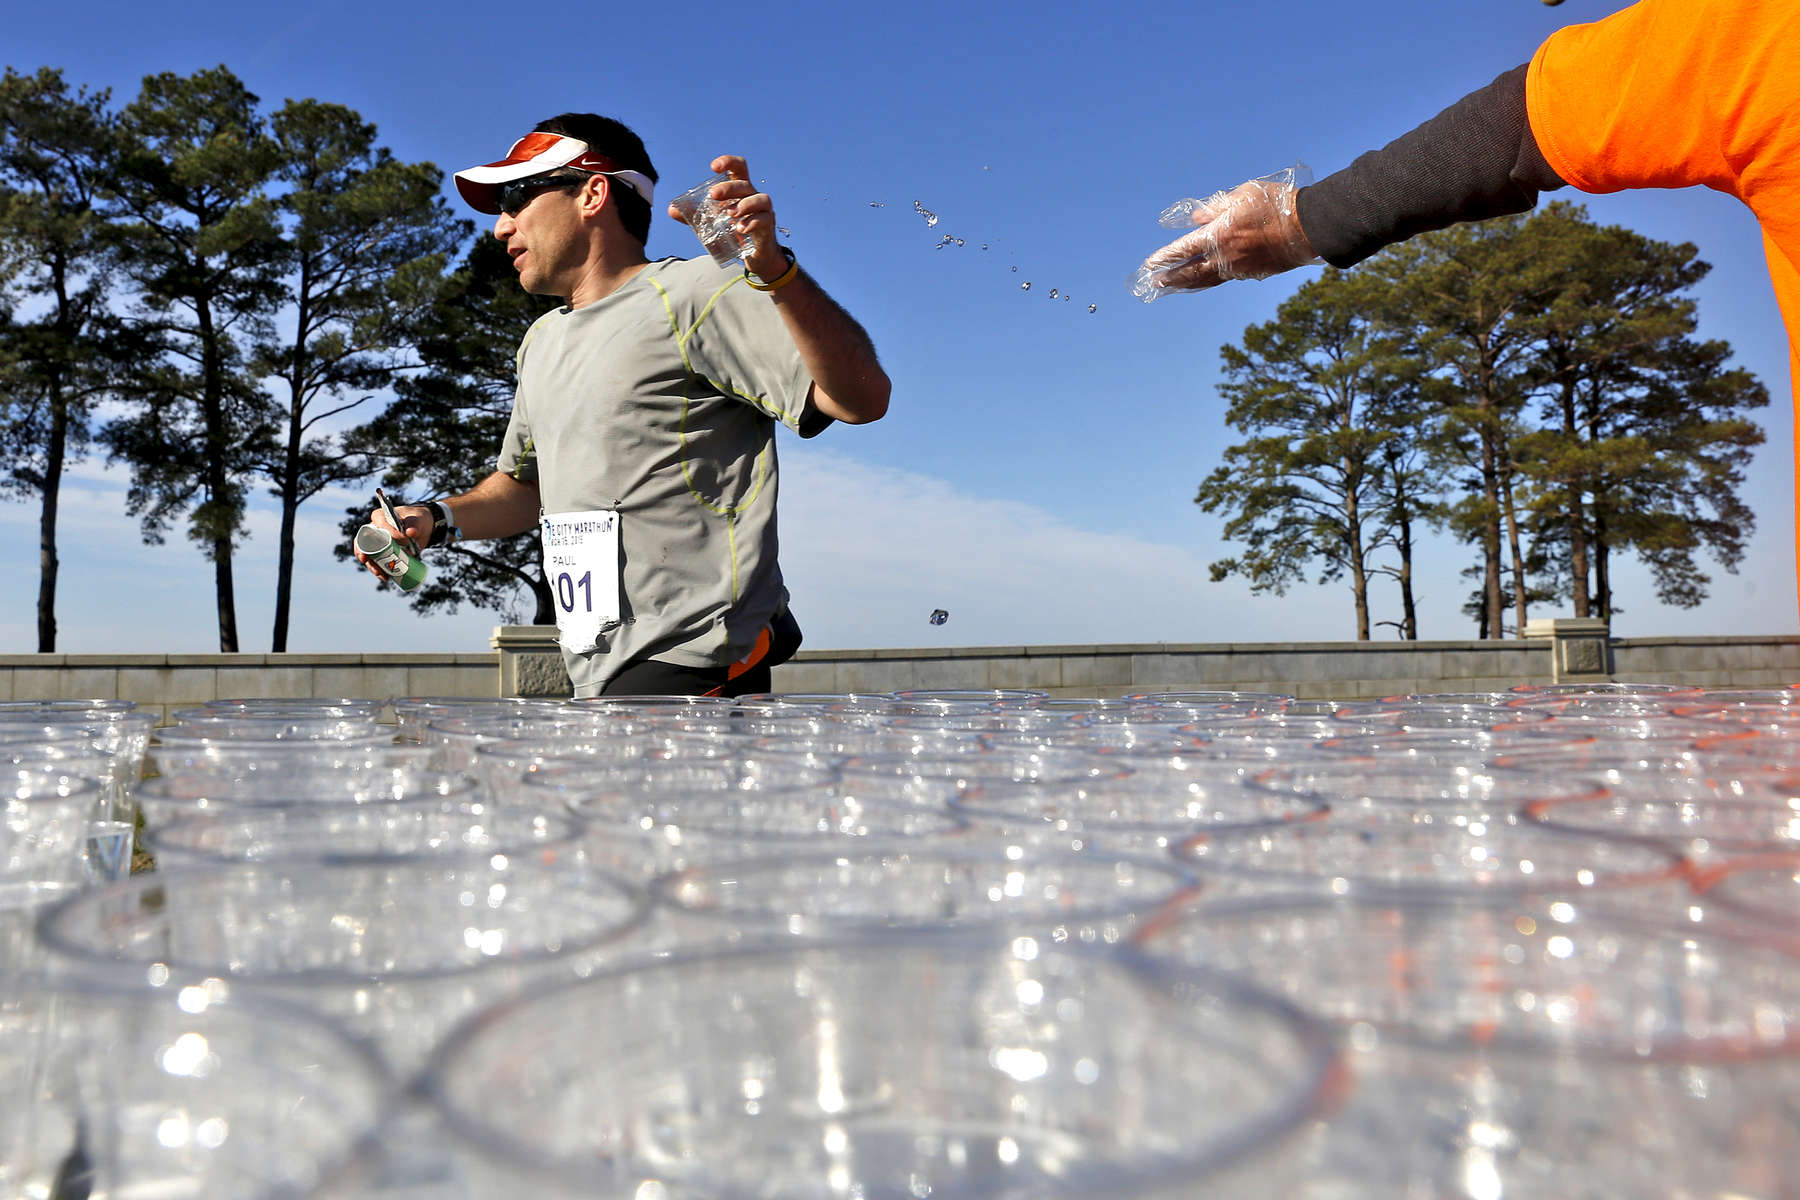 A runner grabs a glass of water from a volunteer at the Lions Bridge during the One City Marathon in Newport News Sunday morning. 